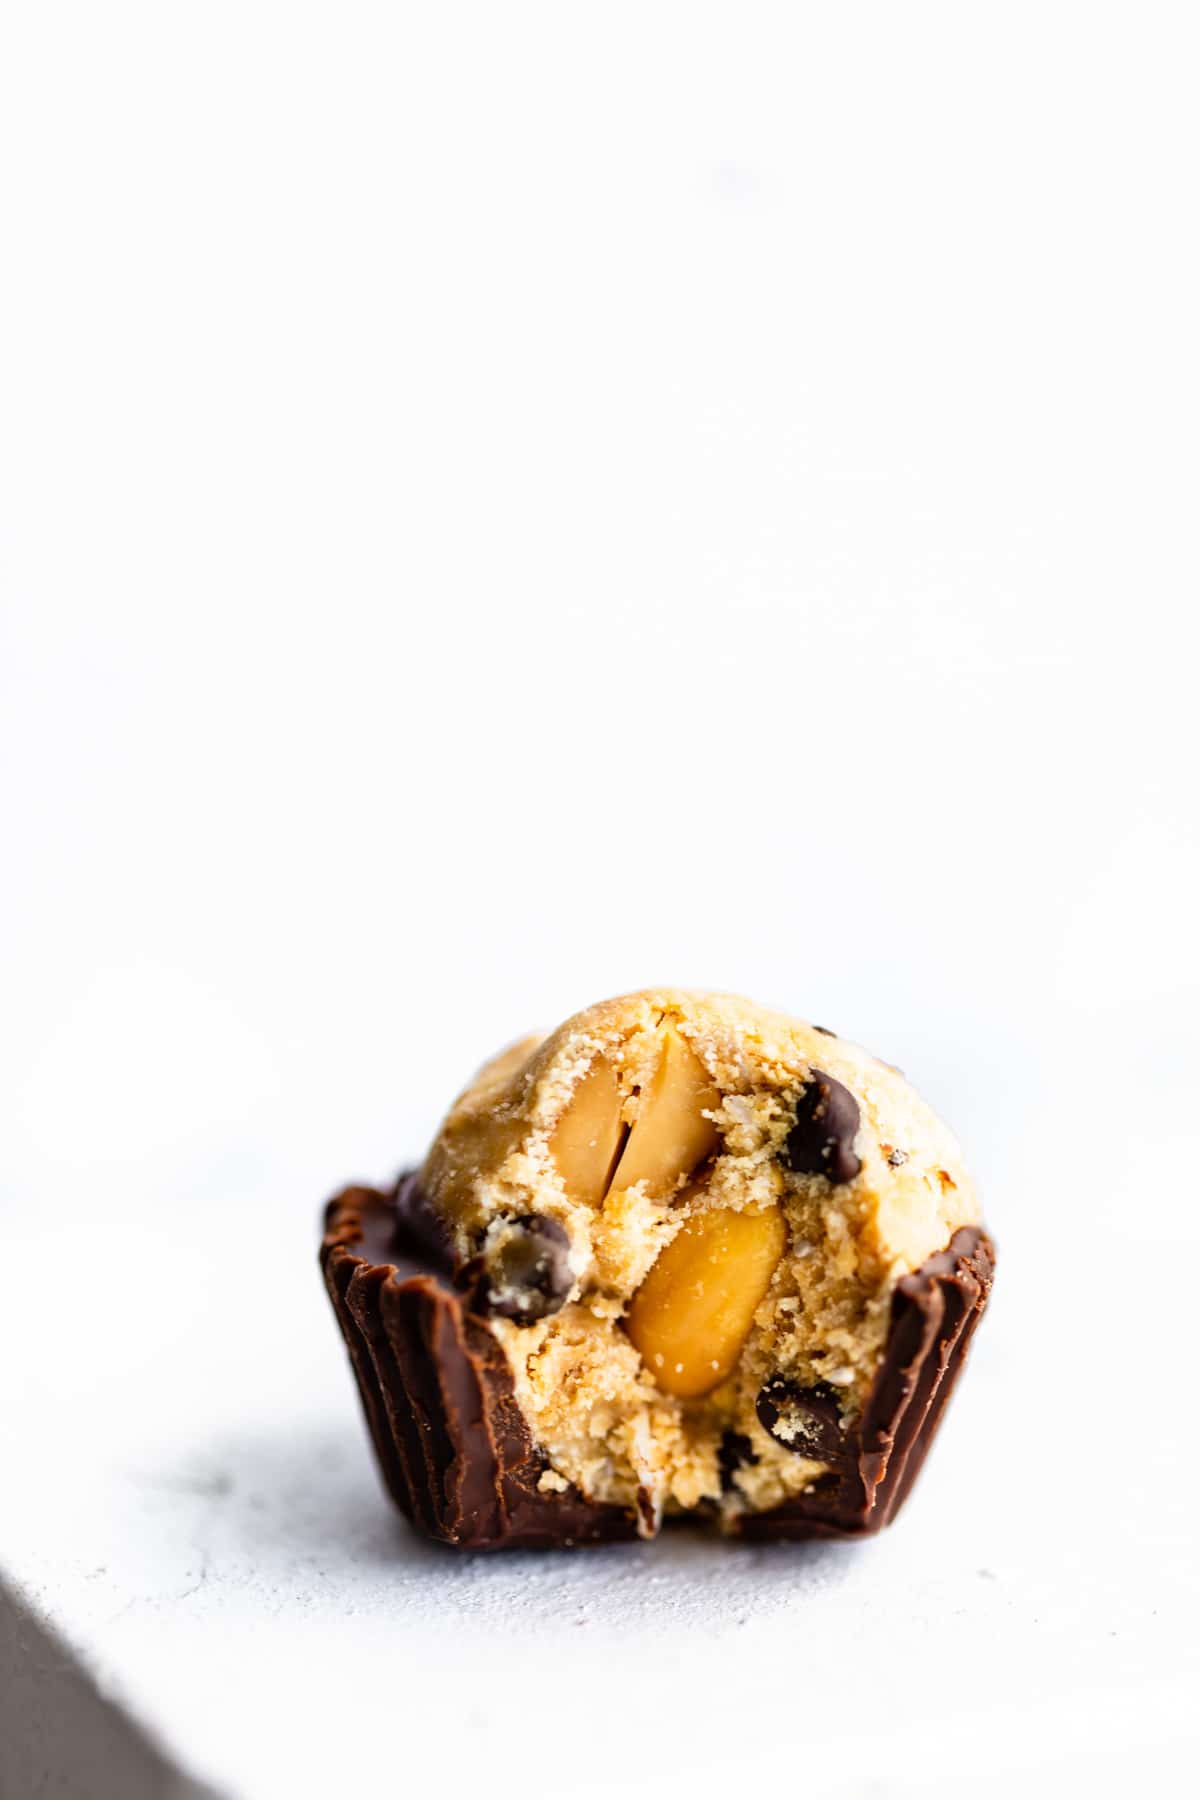 no bake cookie dough chocolate cup with bite taken from side to show inside texture with chocolate chips and nuts.